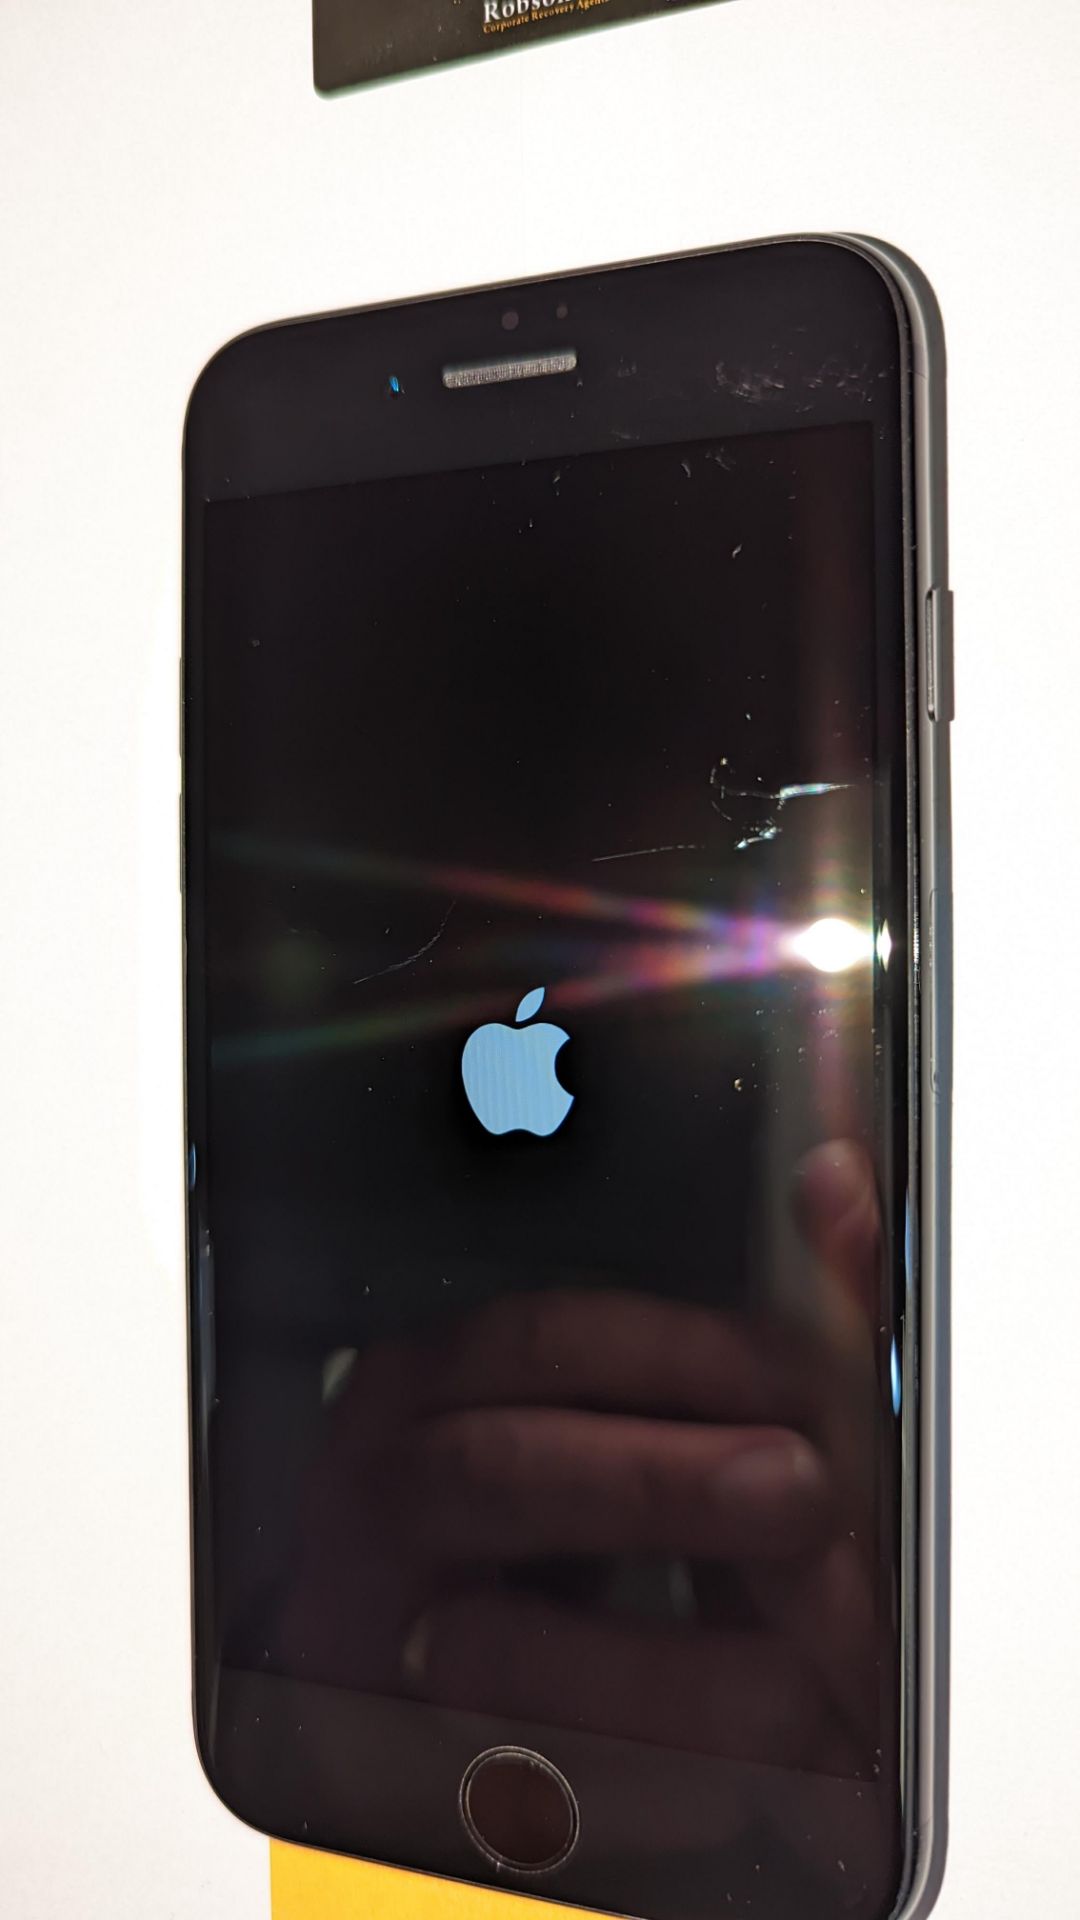 Apple iPhone 7, 32GB capacity, model A1778. No ancillaries or accessories - Image 11 of 11